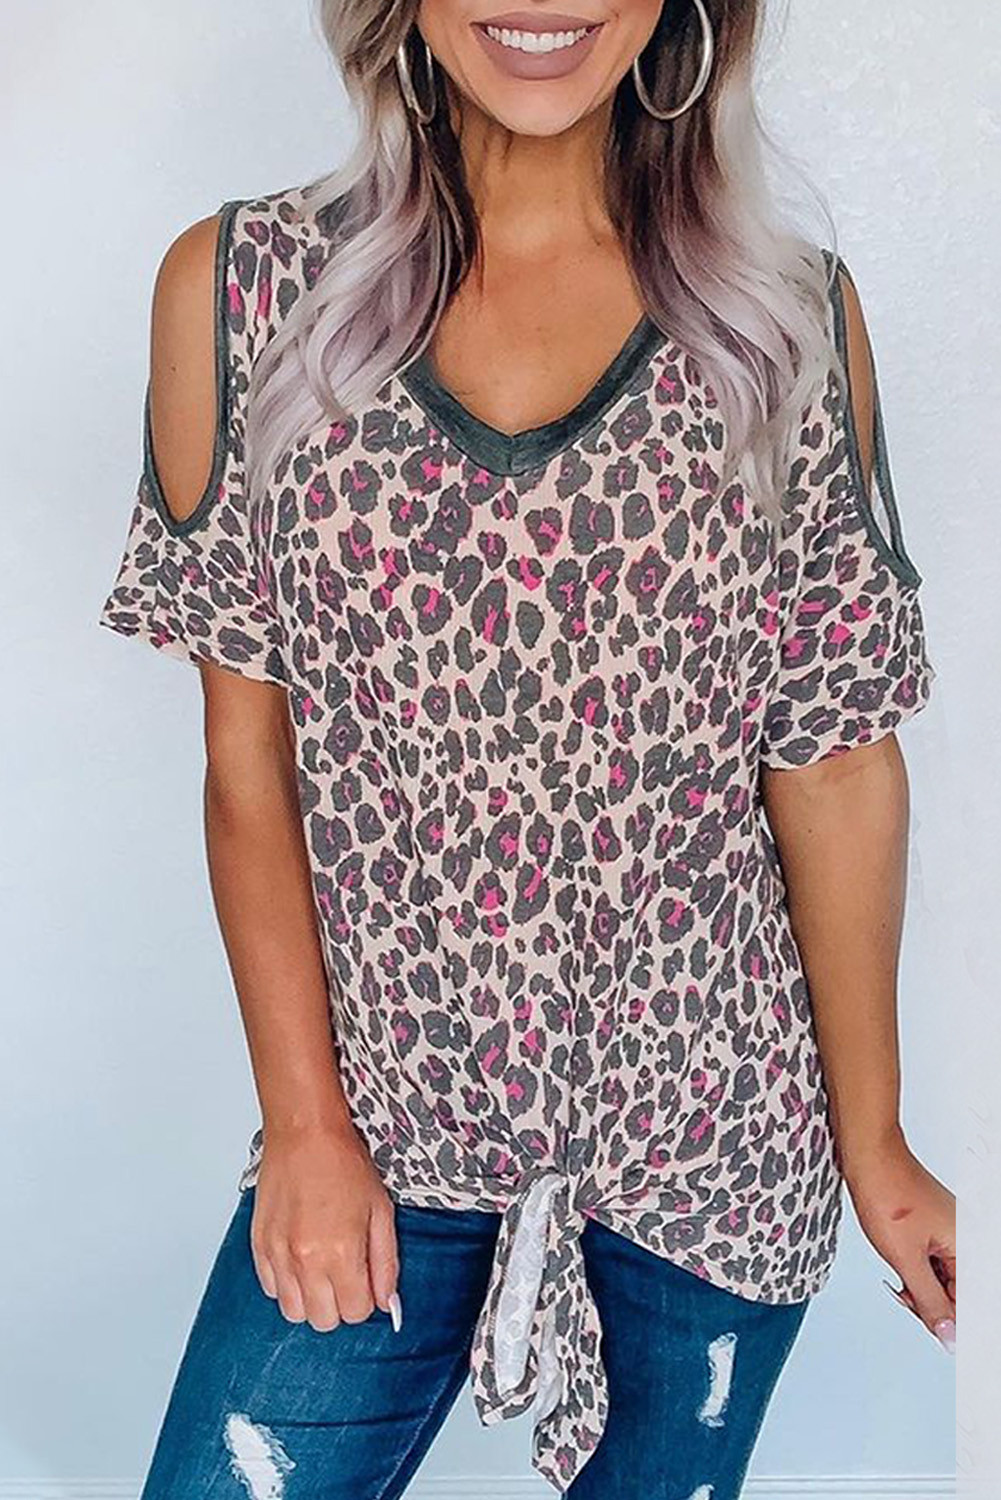 Wholesale Other Category, Cheap Cold Shoulder Leopard Print Top with ...